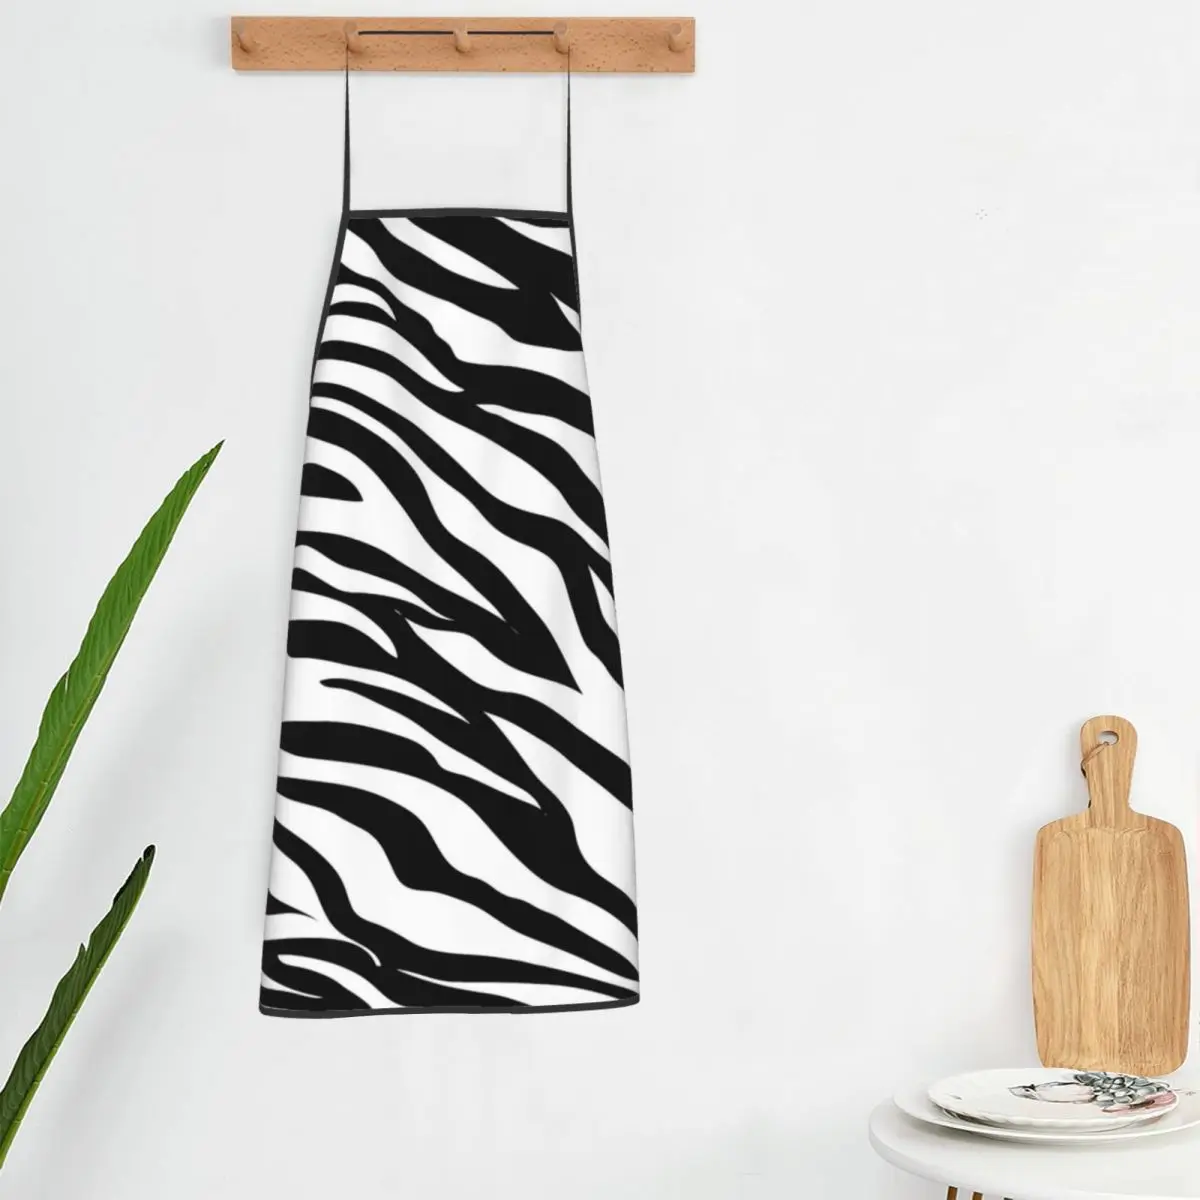 

Zebra Design Apron Black And White Stripes Fashion Household Kitchen Accessories Barbecue Barber Aprons without Pocket